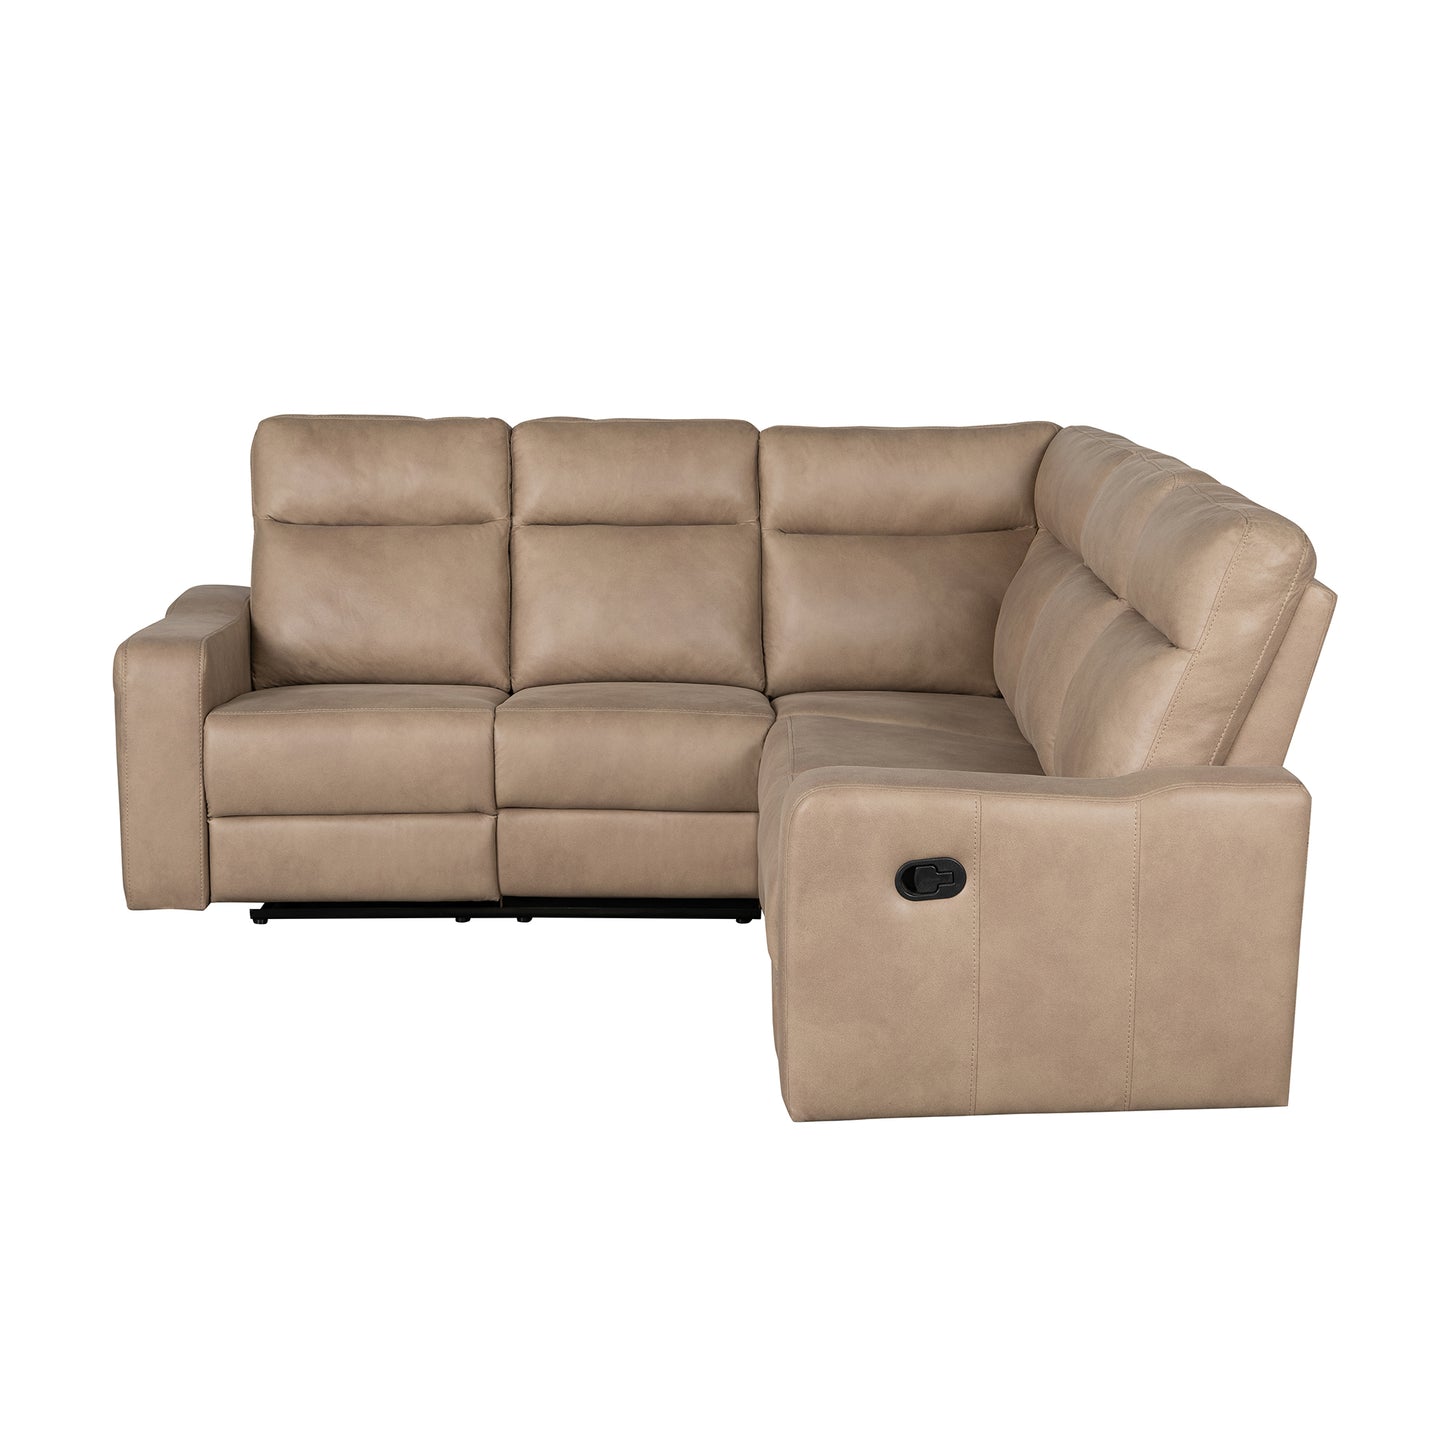 87.5" Manual Reclining Home Theater Seating Recliner Chair Sofa with Flipped Middle Backrest, 2 Cup Holders for Living Room, Bedroom, Home Theater, Light Brown